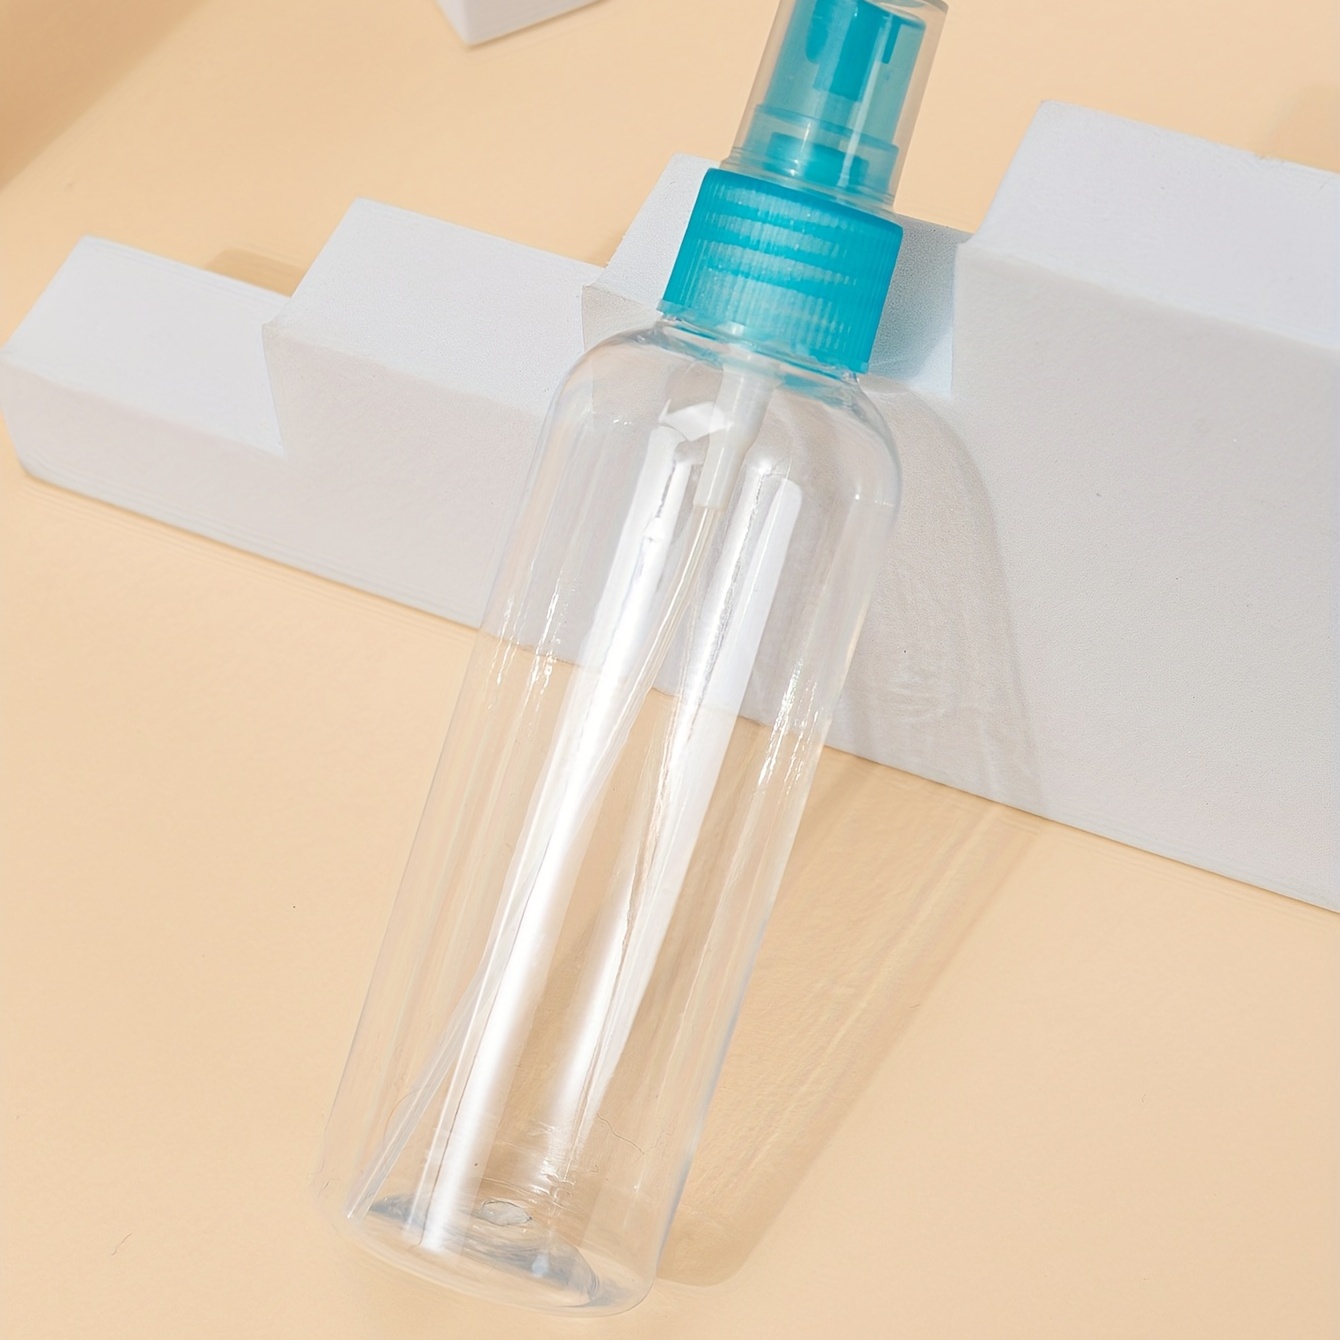 1pc 200ML Subpackage Bottle,Empty Transparent Dispenser Container for Travel  Size Cosmetics,Empty Cosmetic Refillable Travel Containers Plastic Hair  Spray Bottle Sprayer for Perfume Skincare Makeup Lotion